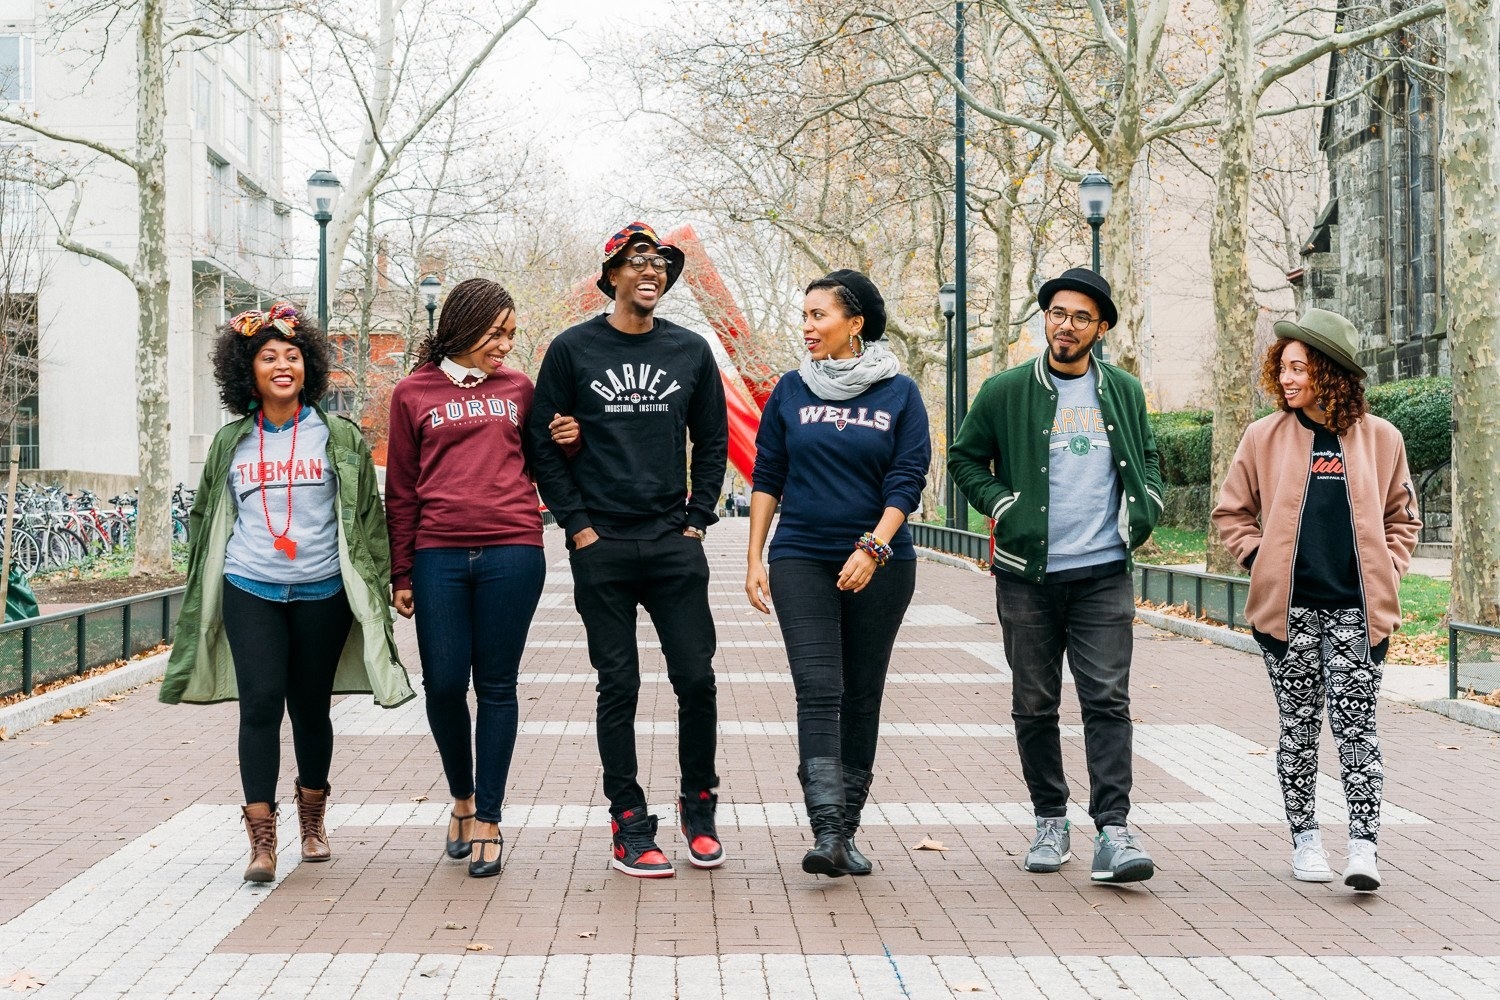 A group of people wearing crewnecks from the shop